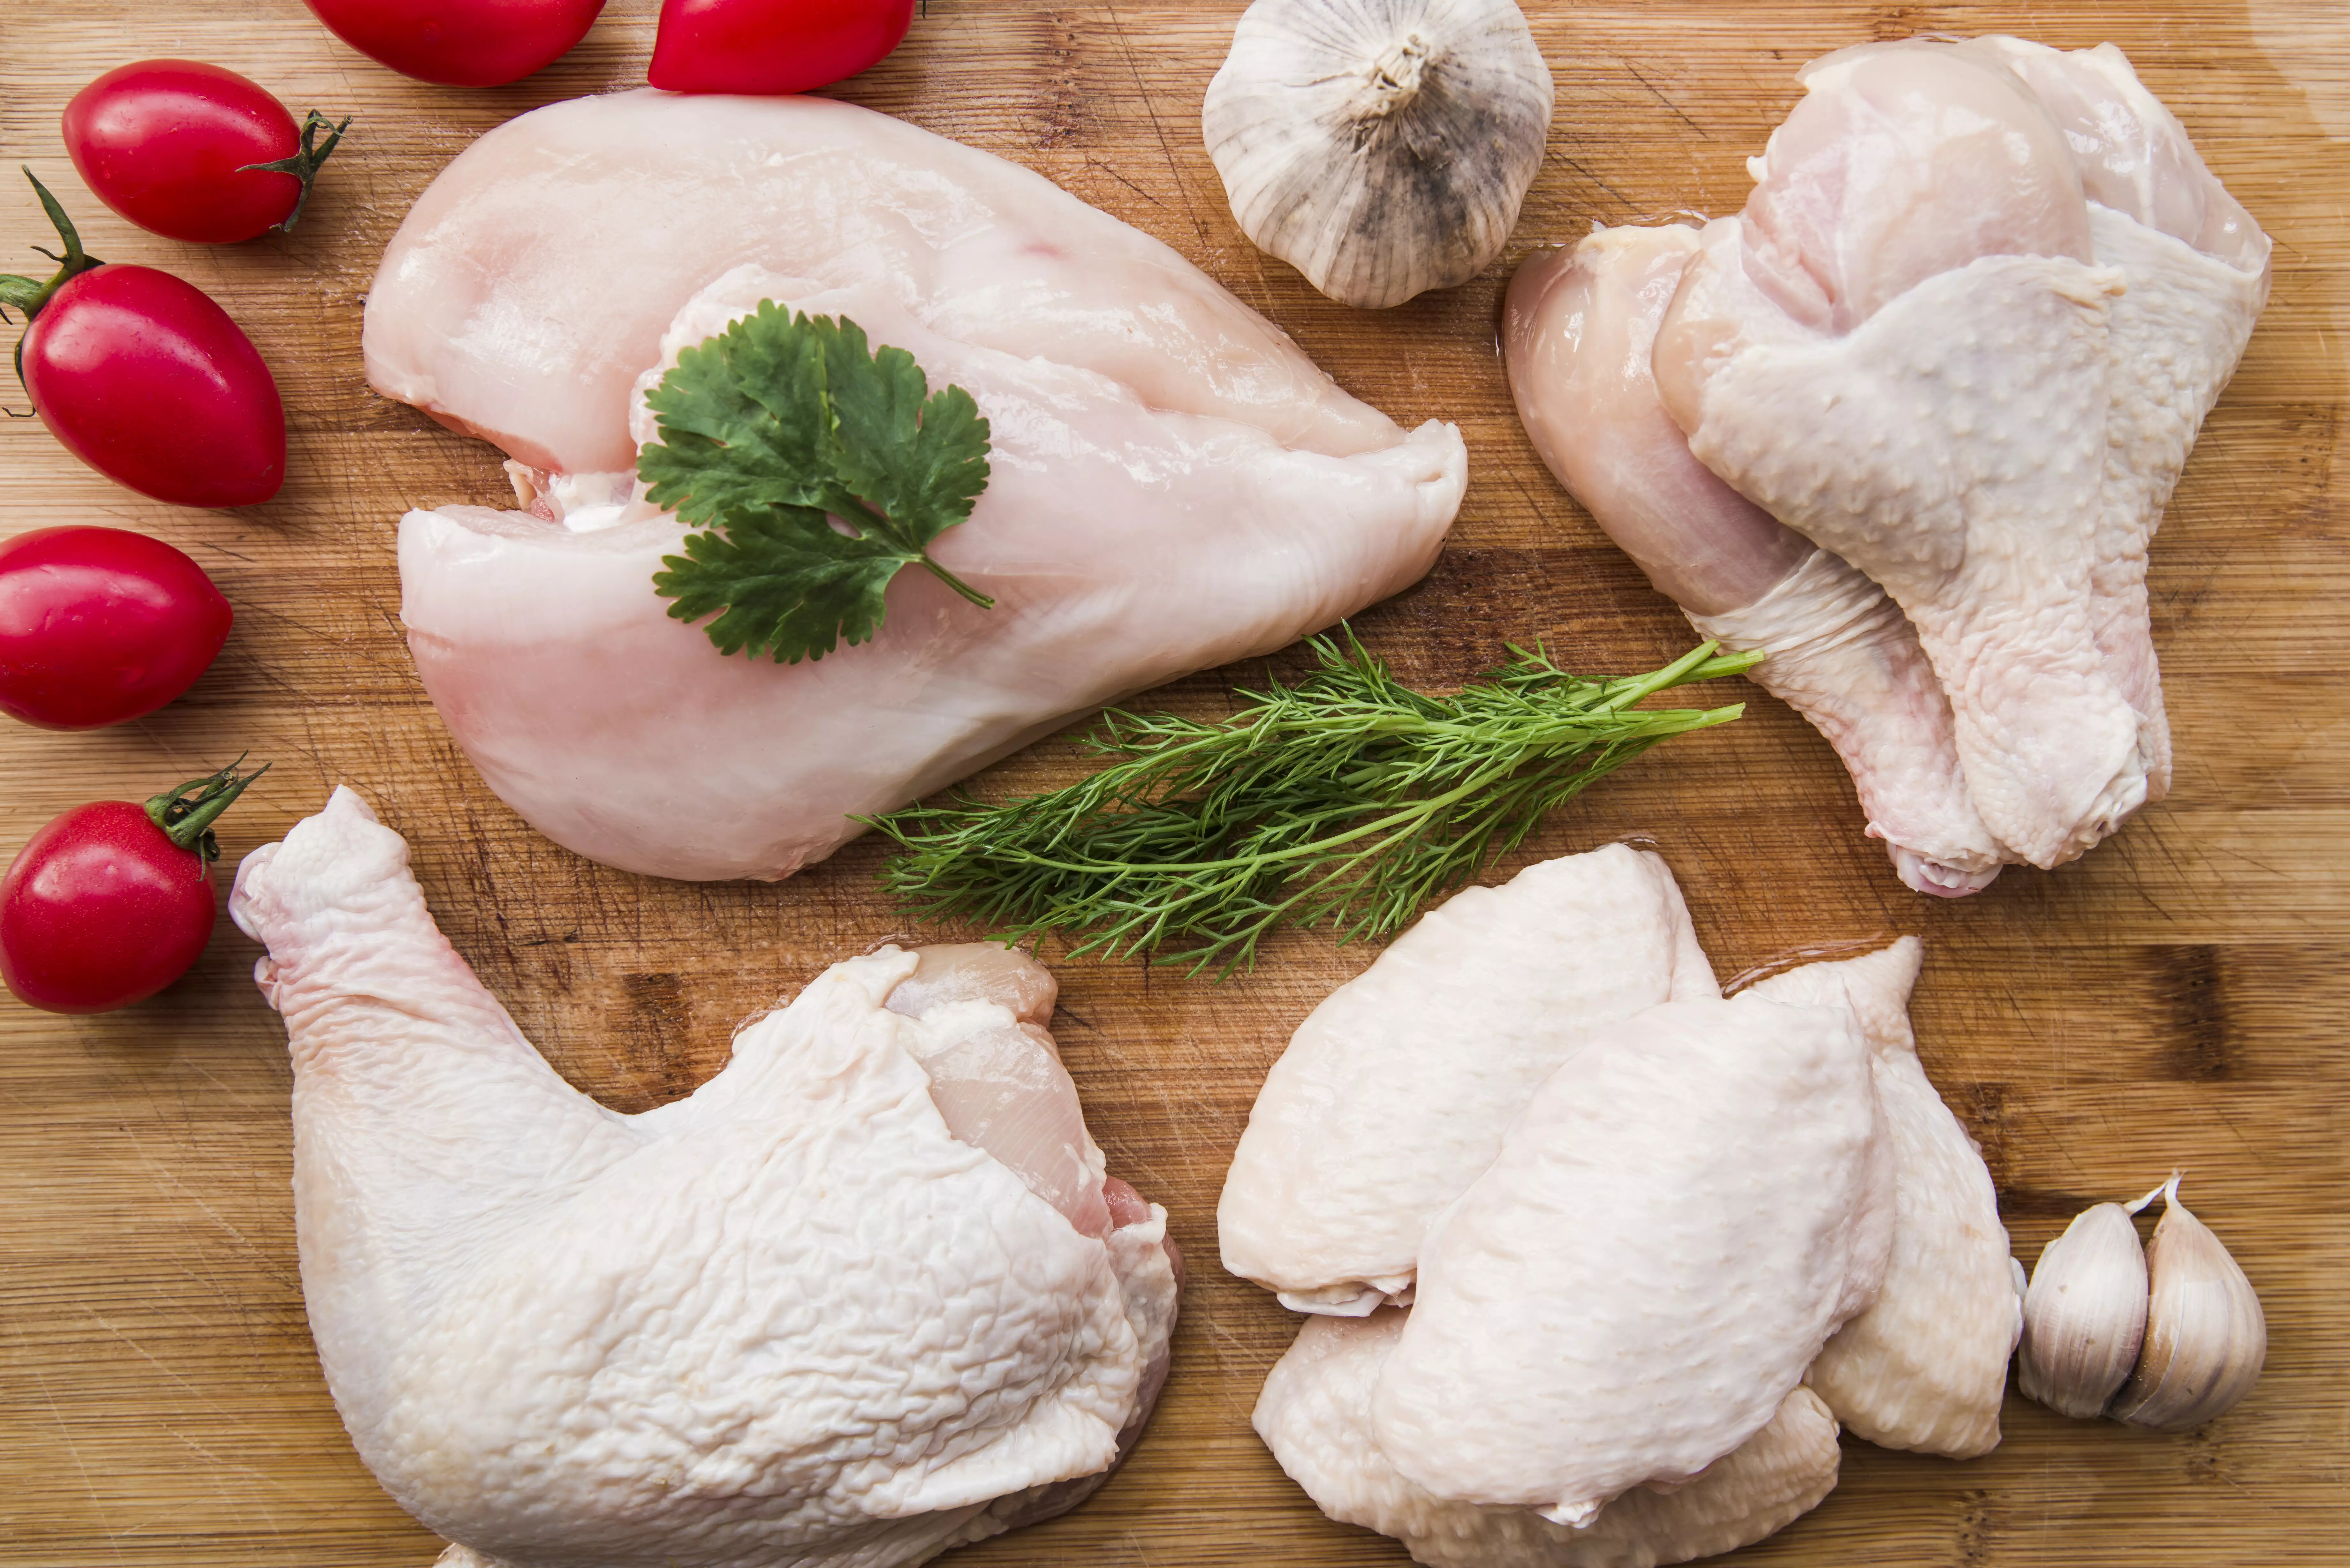 It is better to freeze the chicken before cooking so that the bacteria will die.